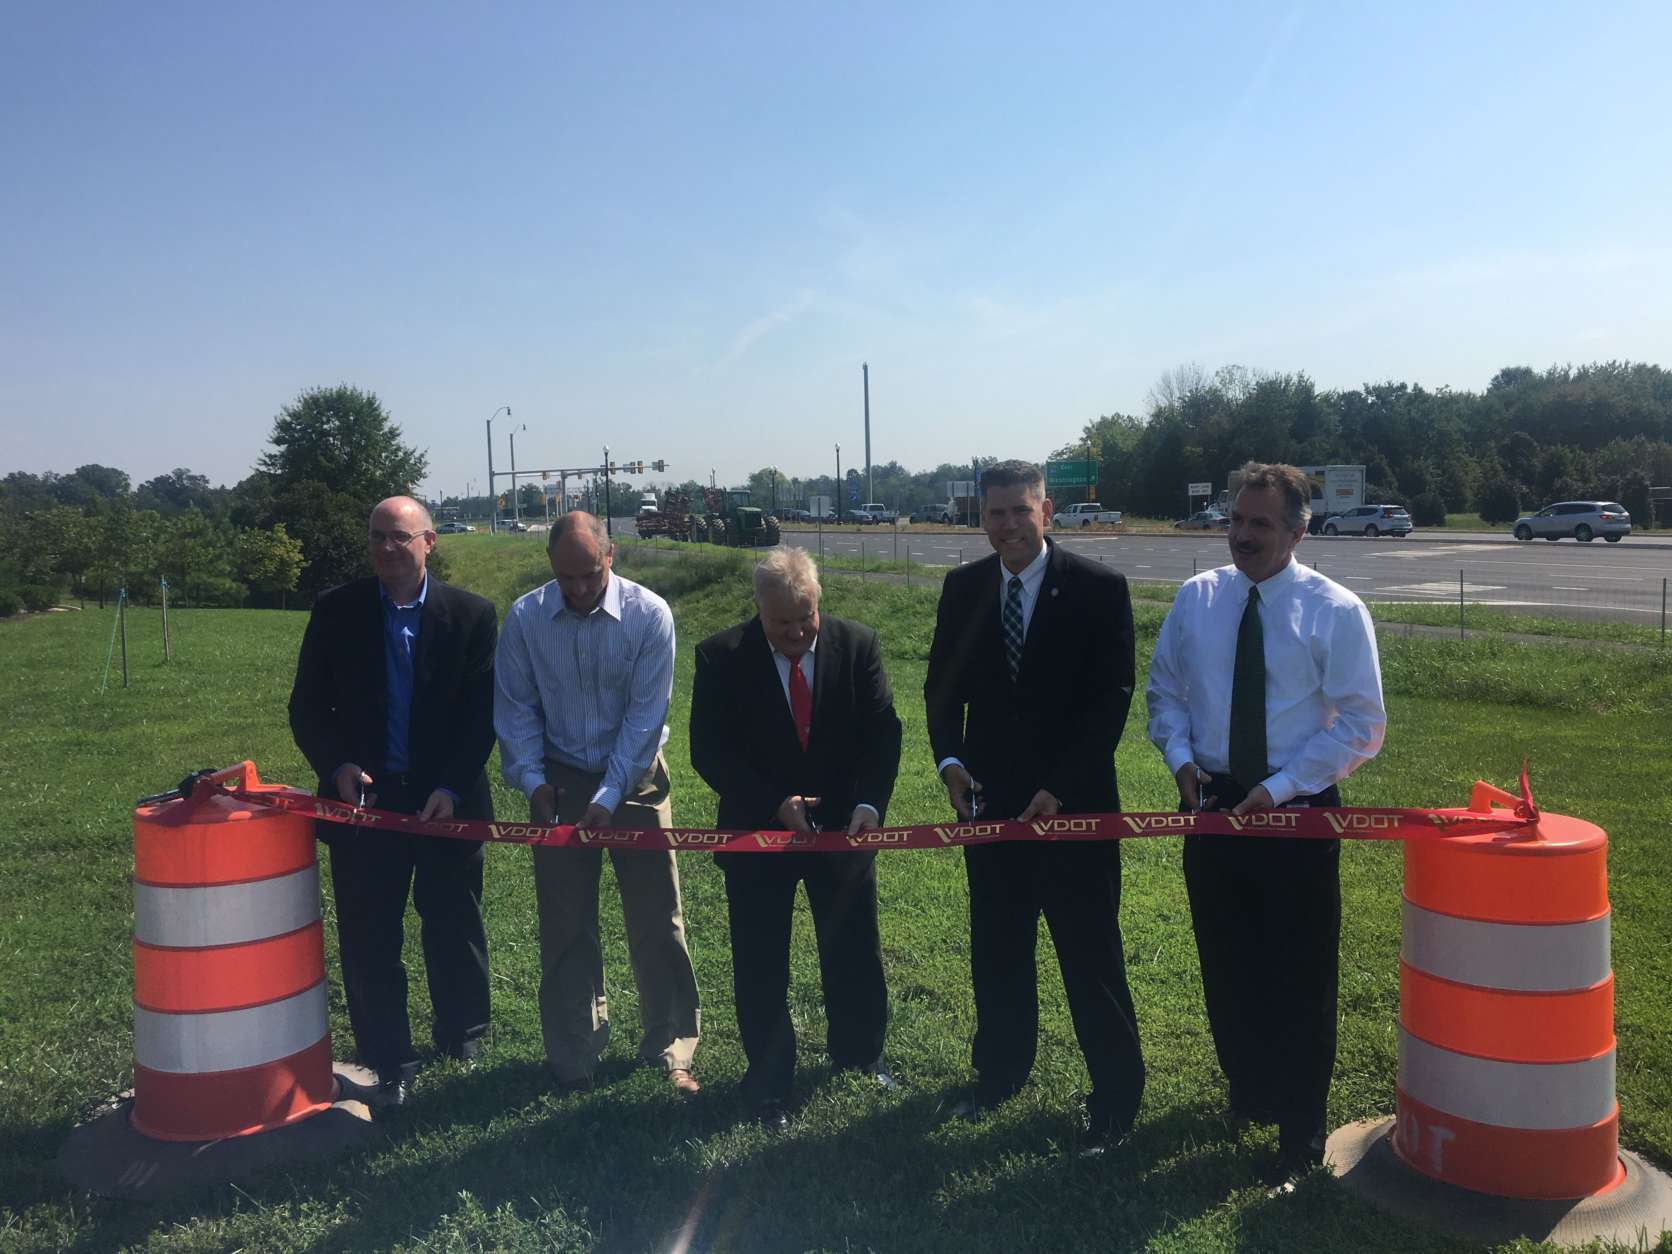 Officials cut the ribbon at the opening of the diverging diamond interchange at U.S. 15 and Interstate 66 in Haymarket. (Courtesy Virginia Department of Transportation)